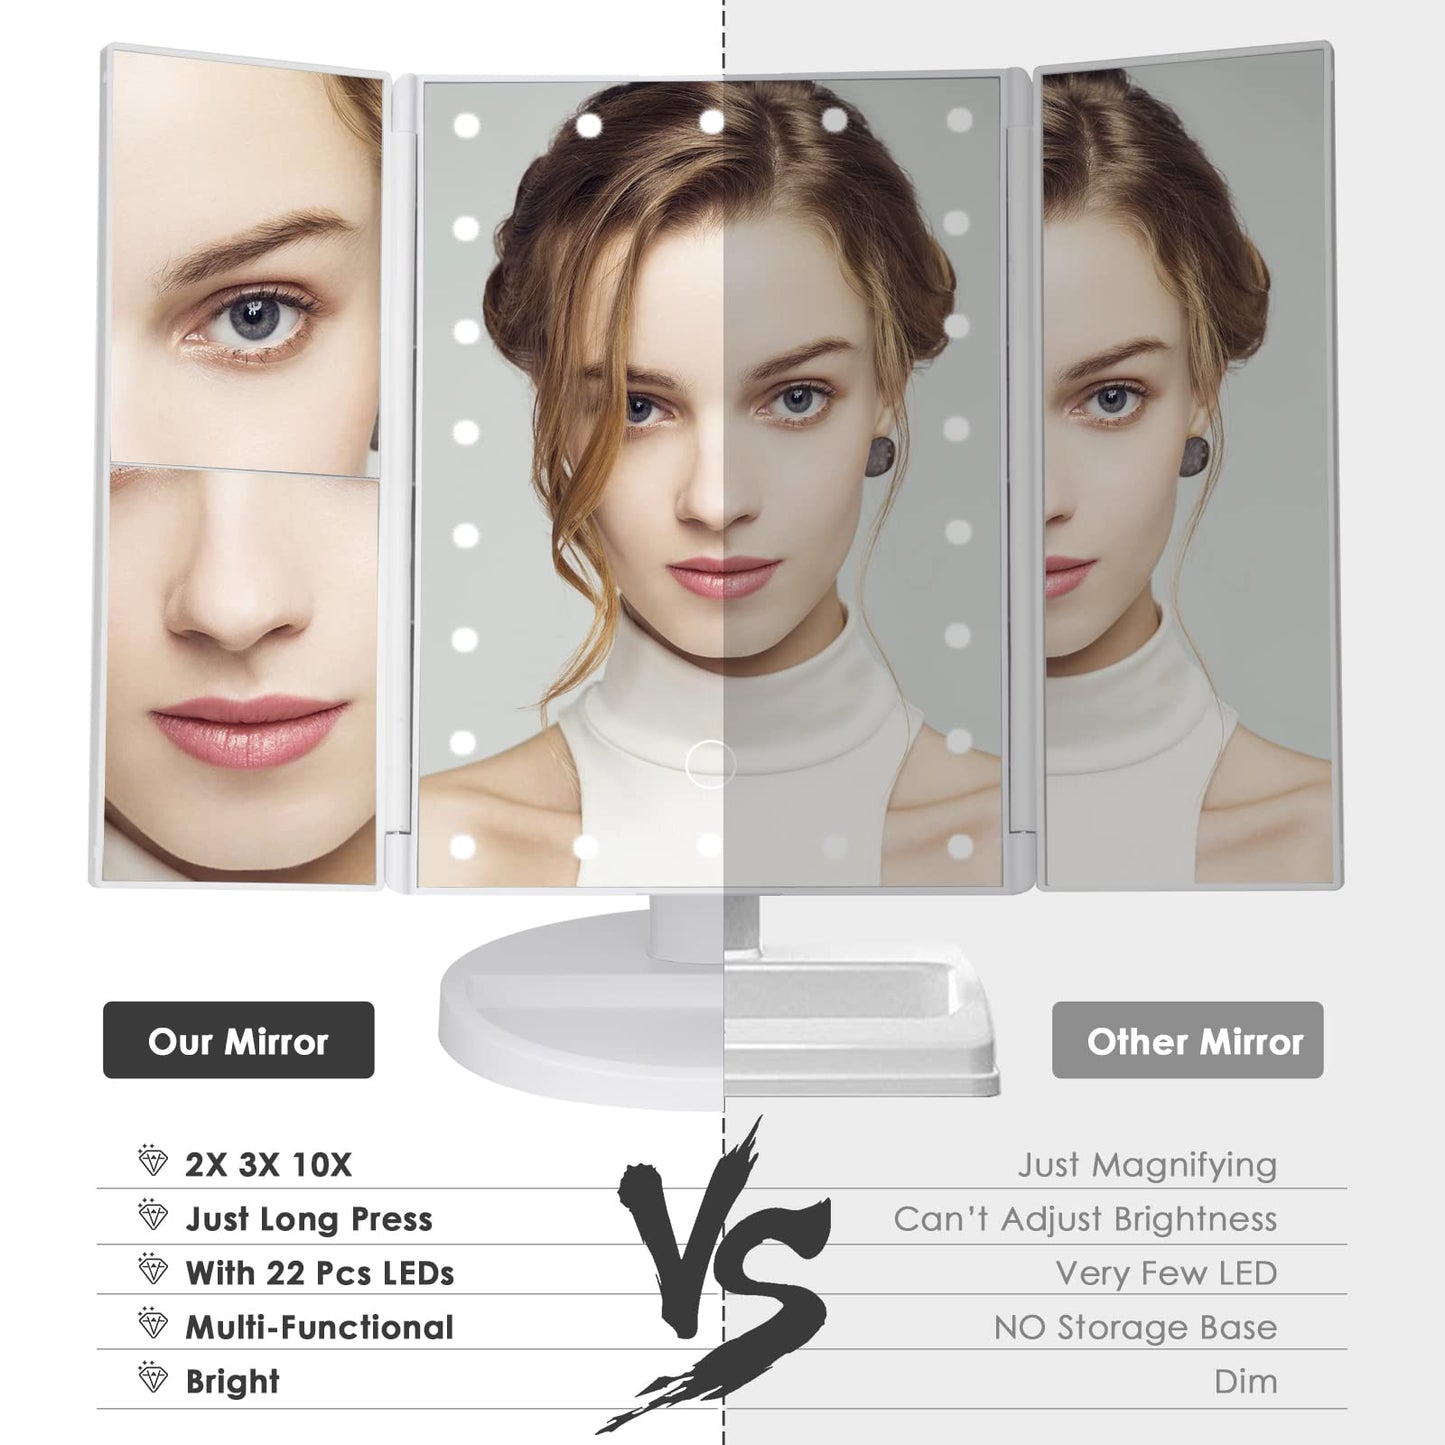 DenCert Makeup Mirror Vanity Mirror with Lights 1X 2X 3X 10X Magnification, Lighted Makeup Mirror, Touch Control, Tri-Fold Portable LED Makeup Vanity, Two Power Supply Modes, White